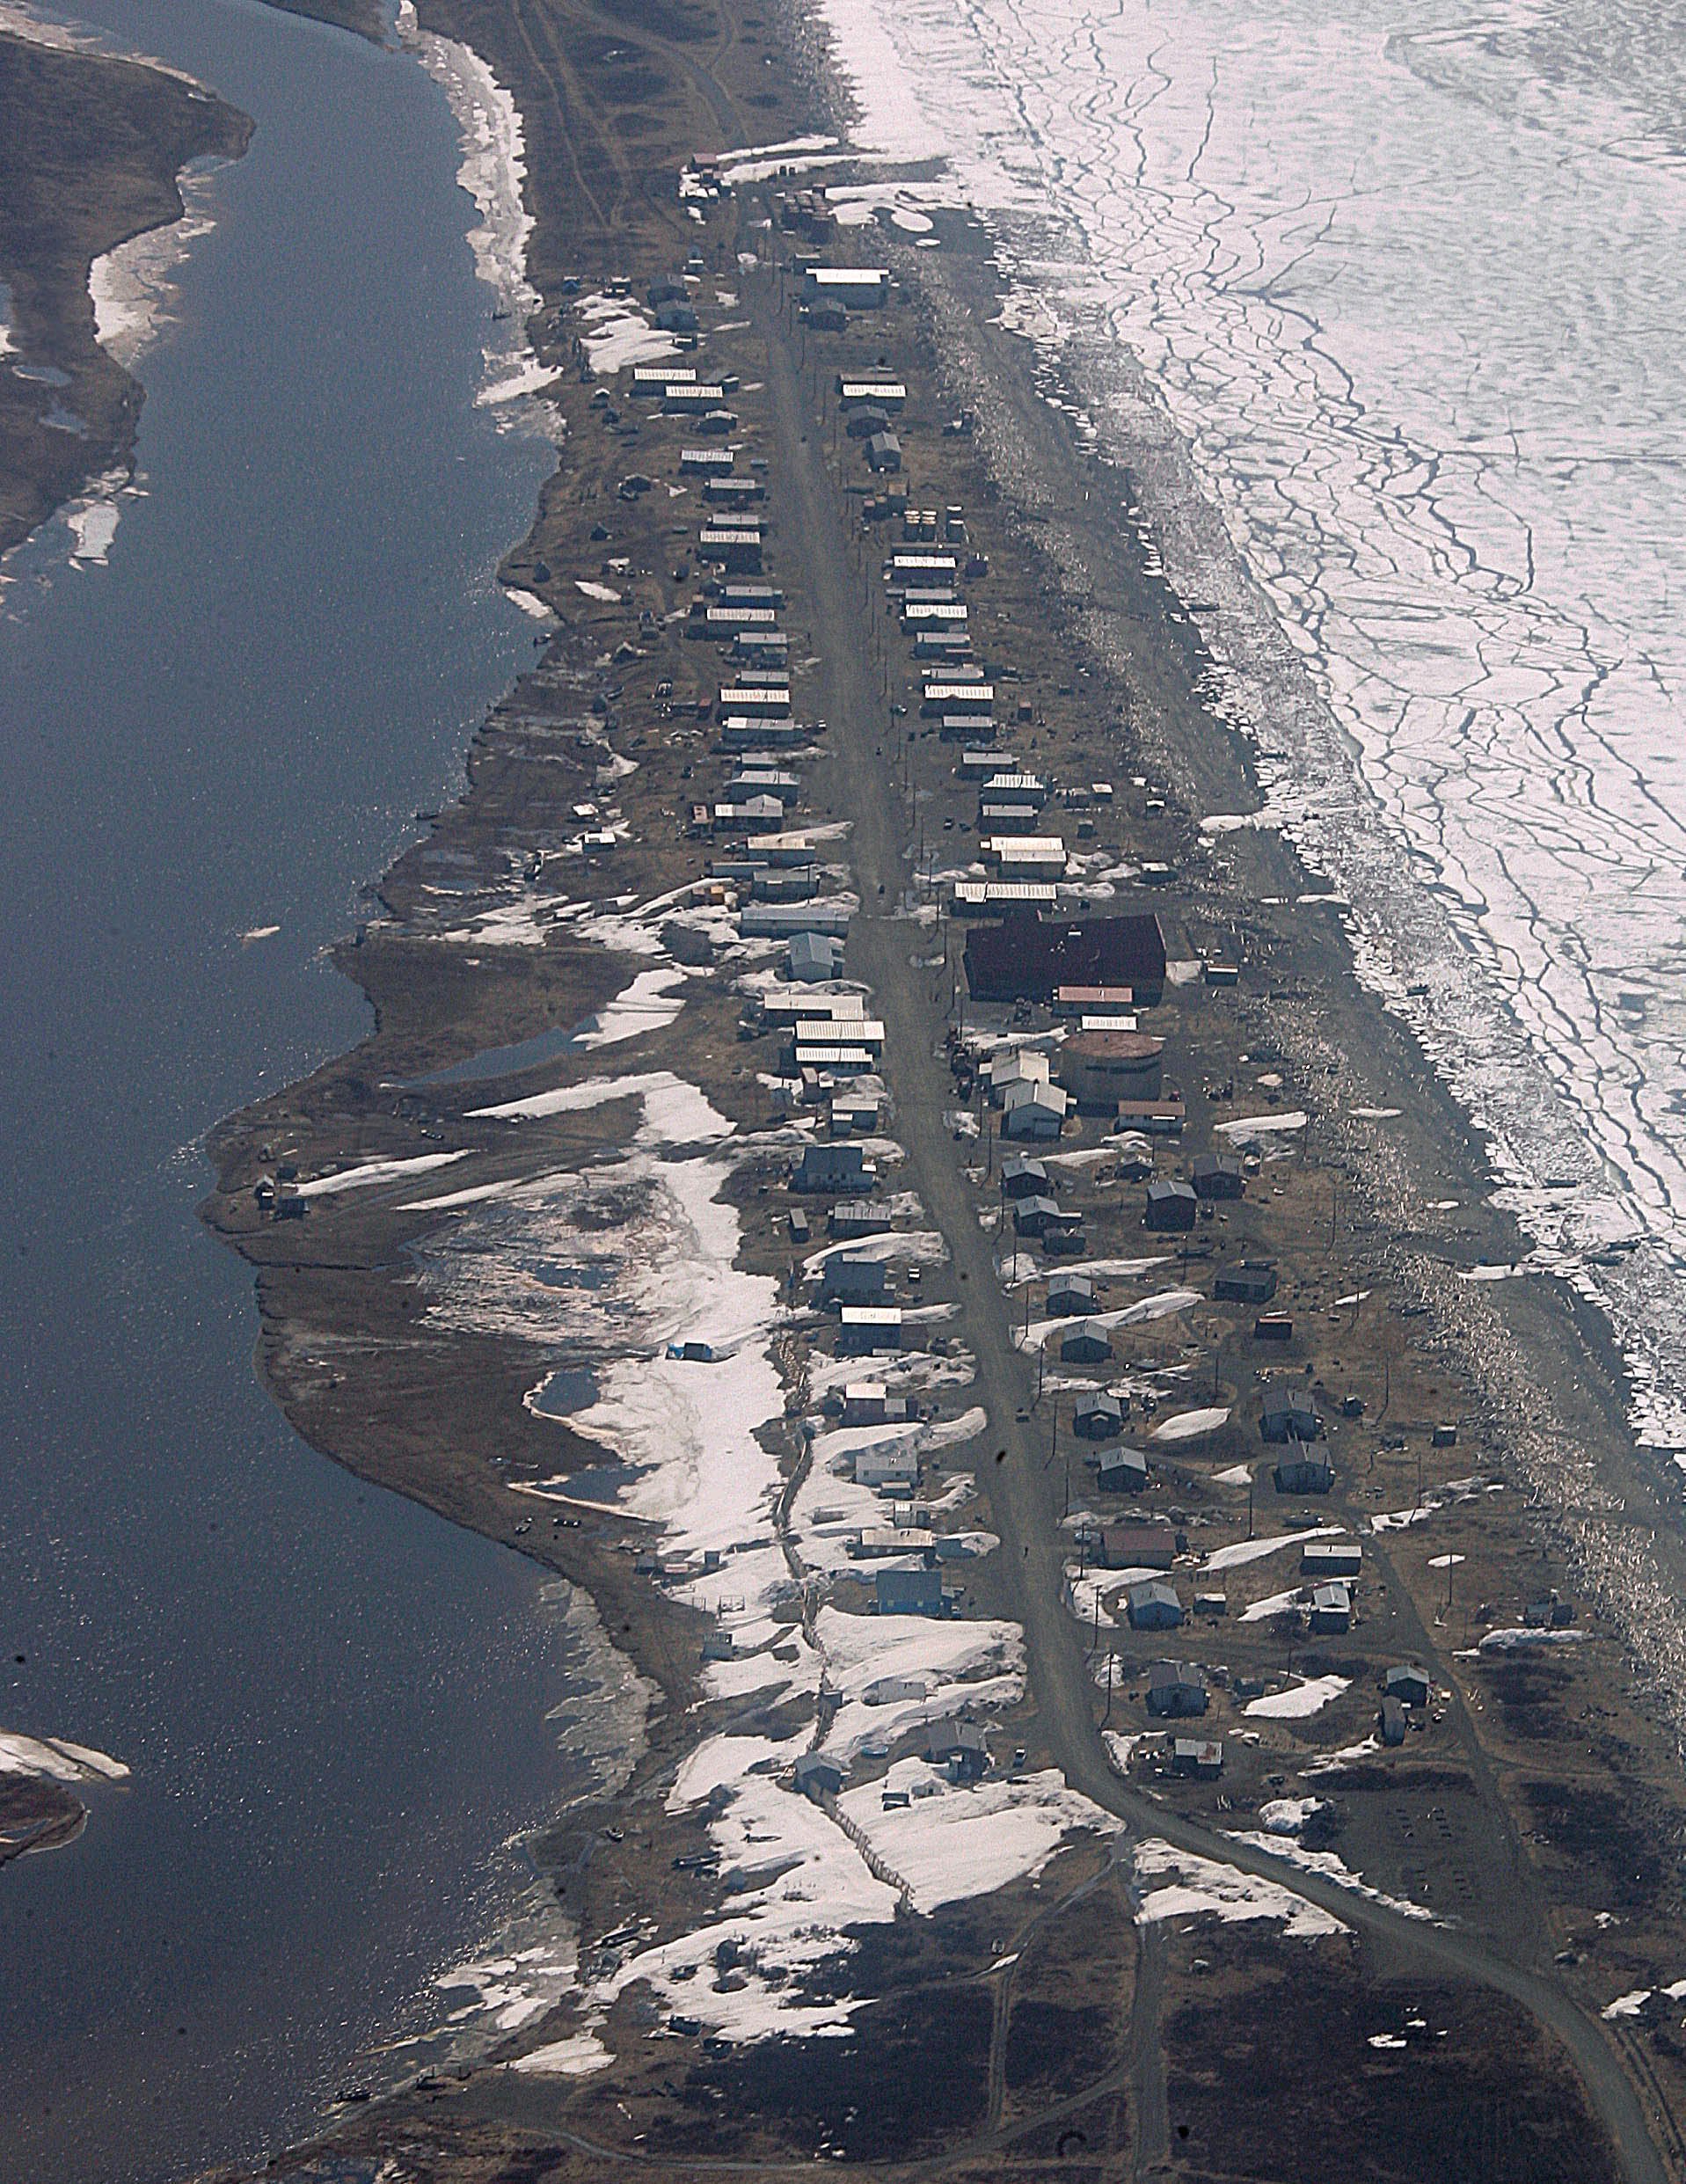 Village of Shaktoolik, Alaska, shown in May 28, 2006. Melting permafrost, coastal erosion, increased flooding and a rise in sea level due to the warming climate change will take a toll on buildings, ports, bridges and roads according to a recent report. (/Al Grillo / AP Photo / File)